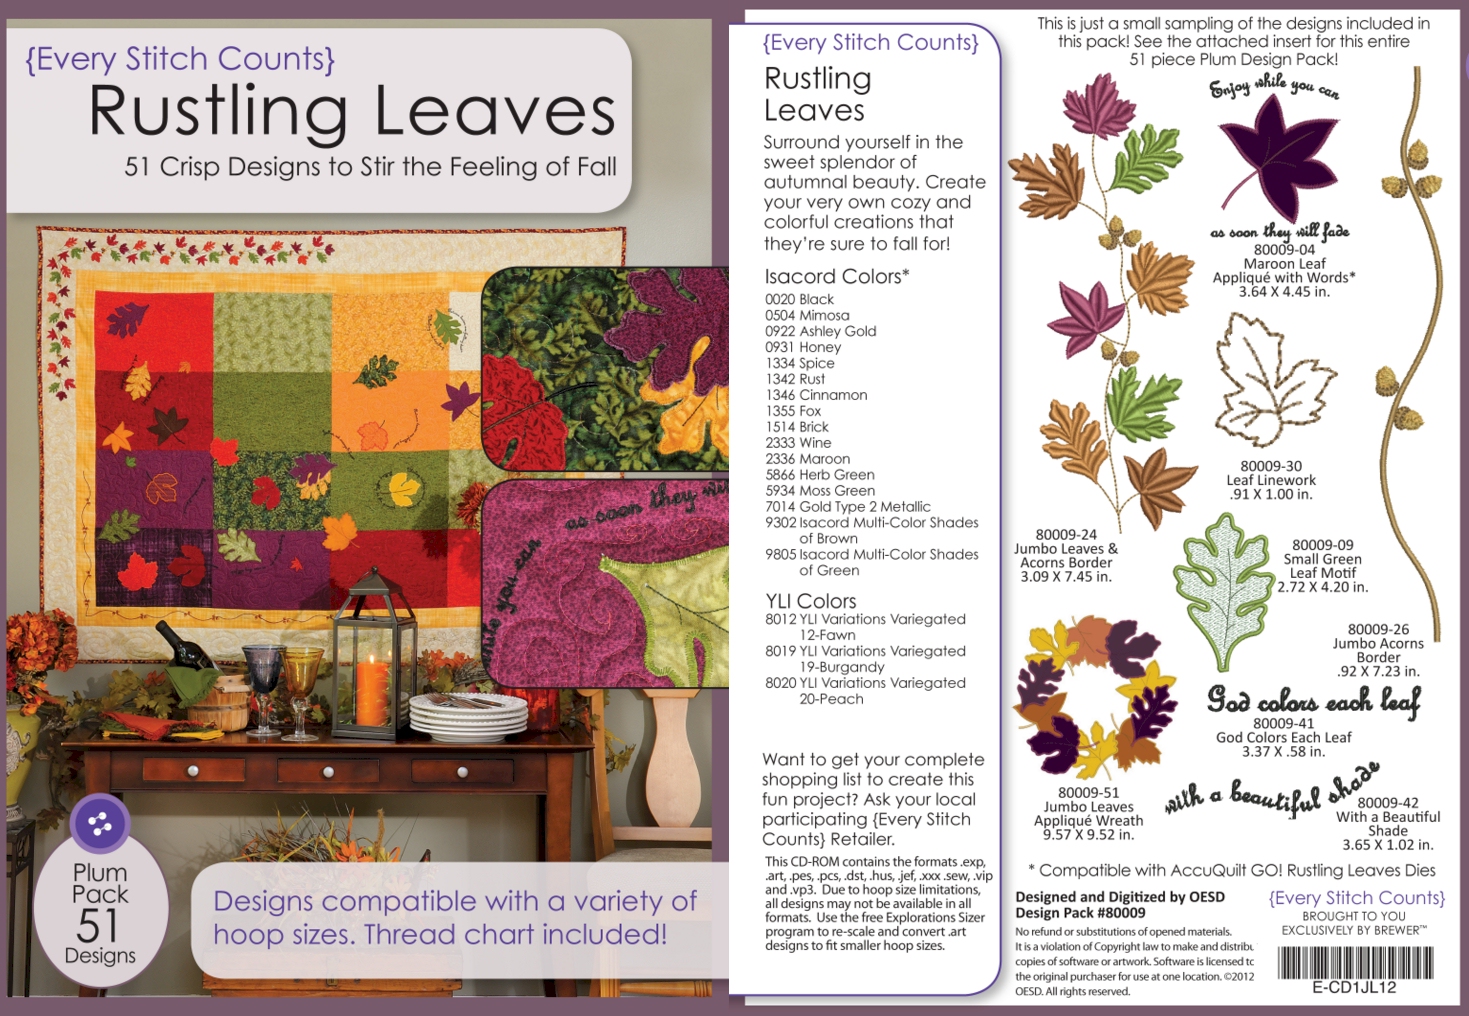 Rustling Leaves Embroidery Designs on CD-ROM by Every Stitch Counts CLOSEOUT